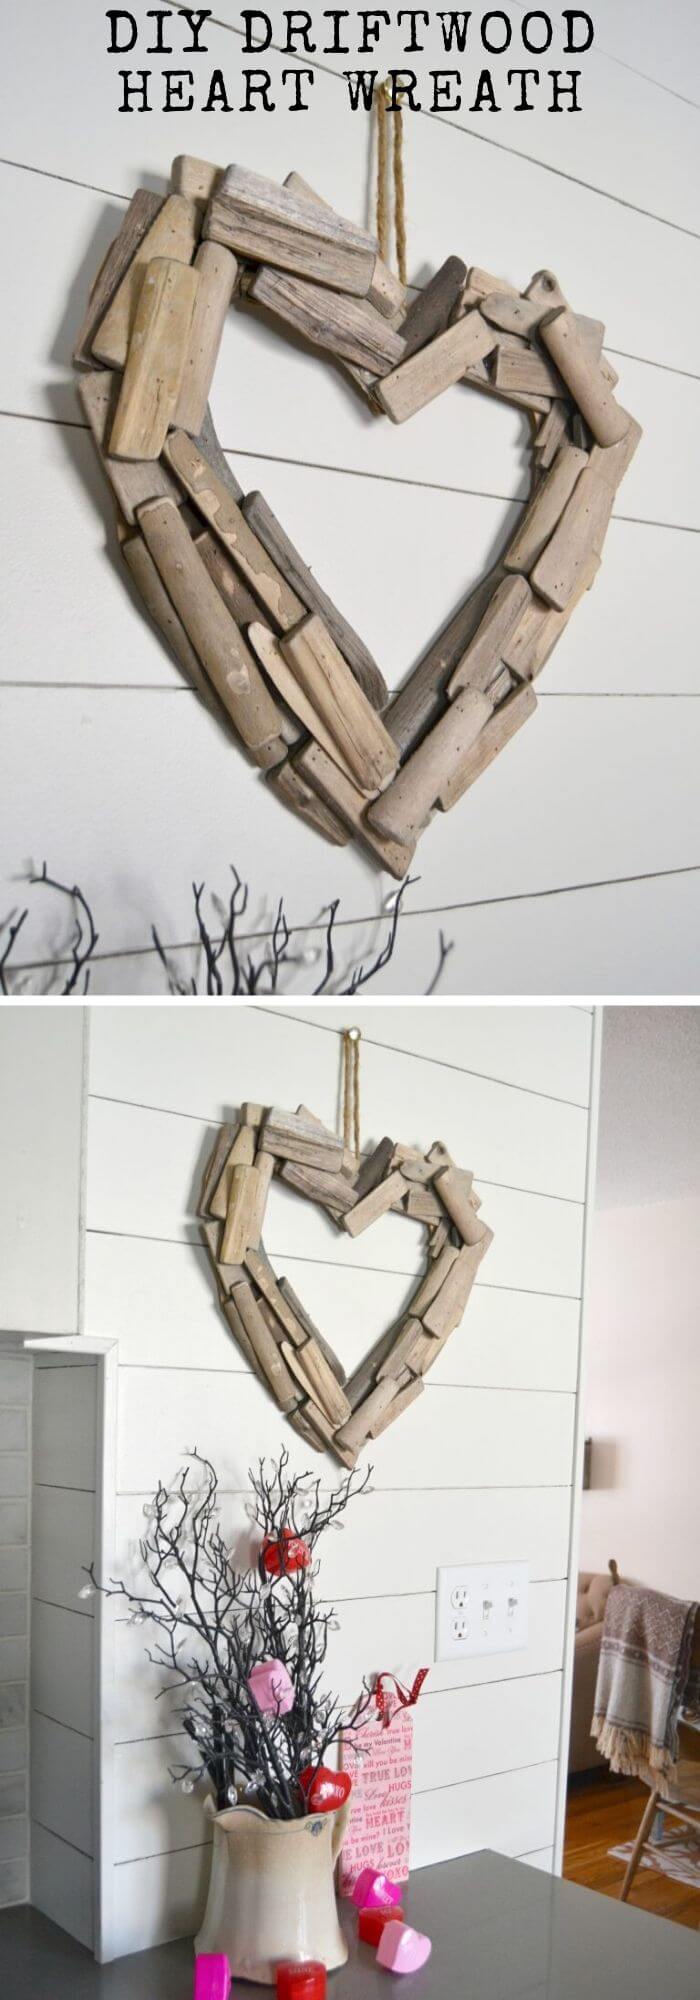 The lovely wood heart projects